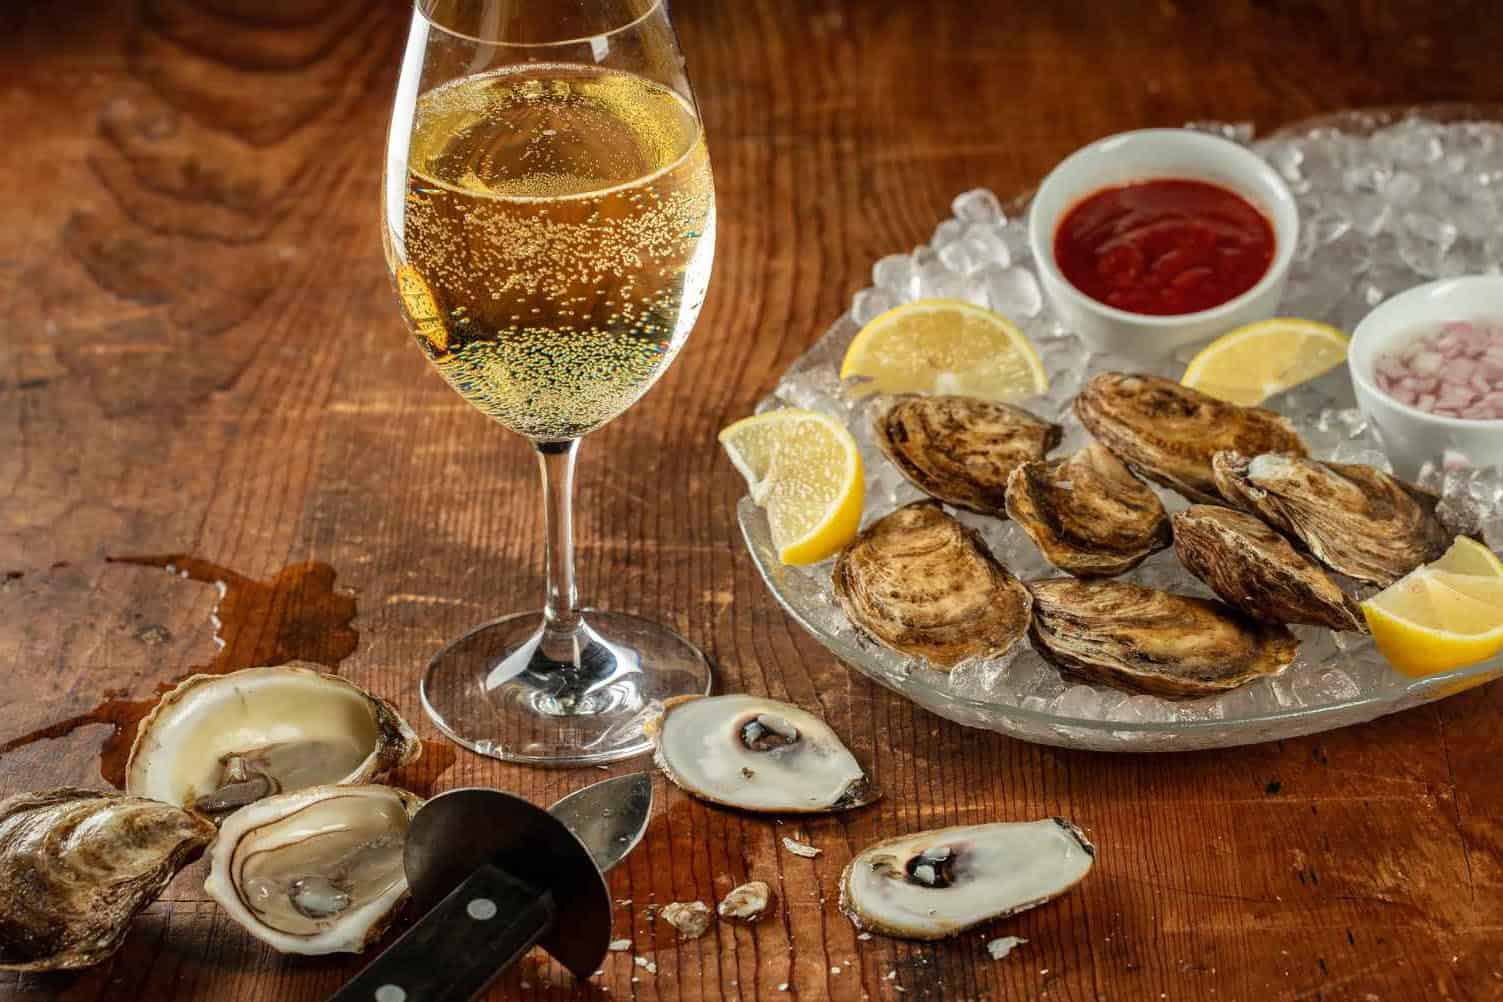 Sparkling wine or dry white wine and oysters